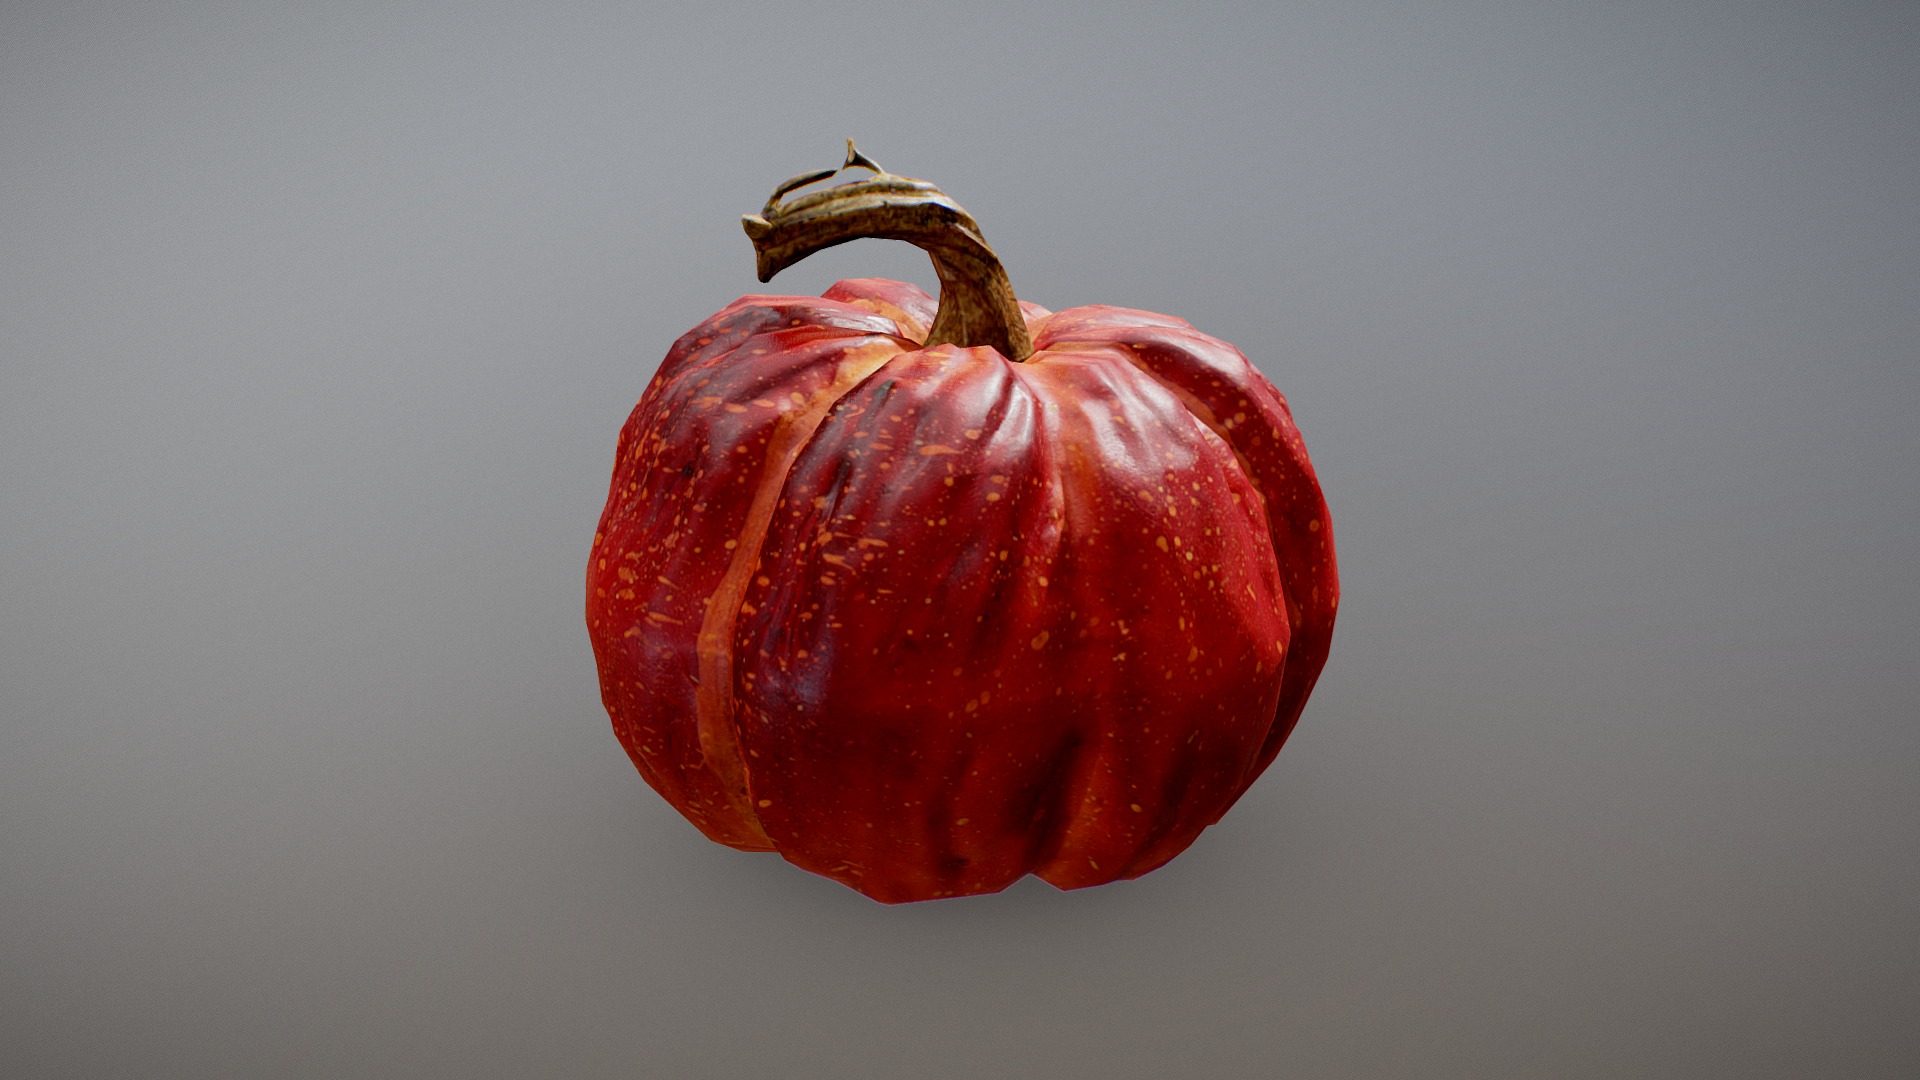 3D model Decorative Pier1 Pumpkin - This is a 3D model of the Decorative Pier1 Pumpkin. The 3D model is about a red apple with a stem.